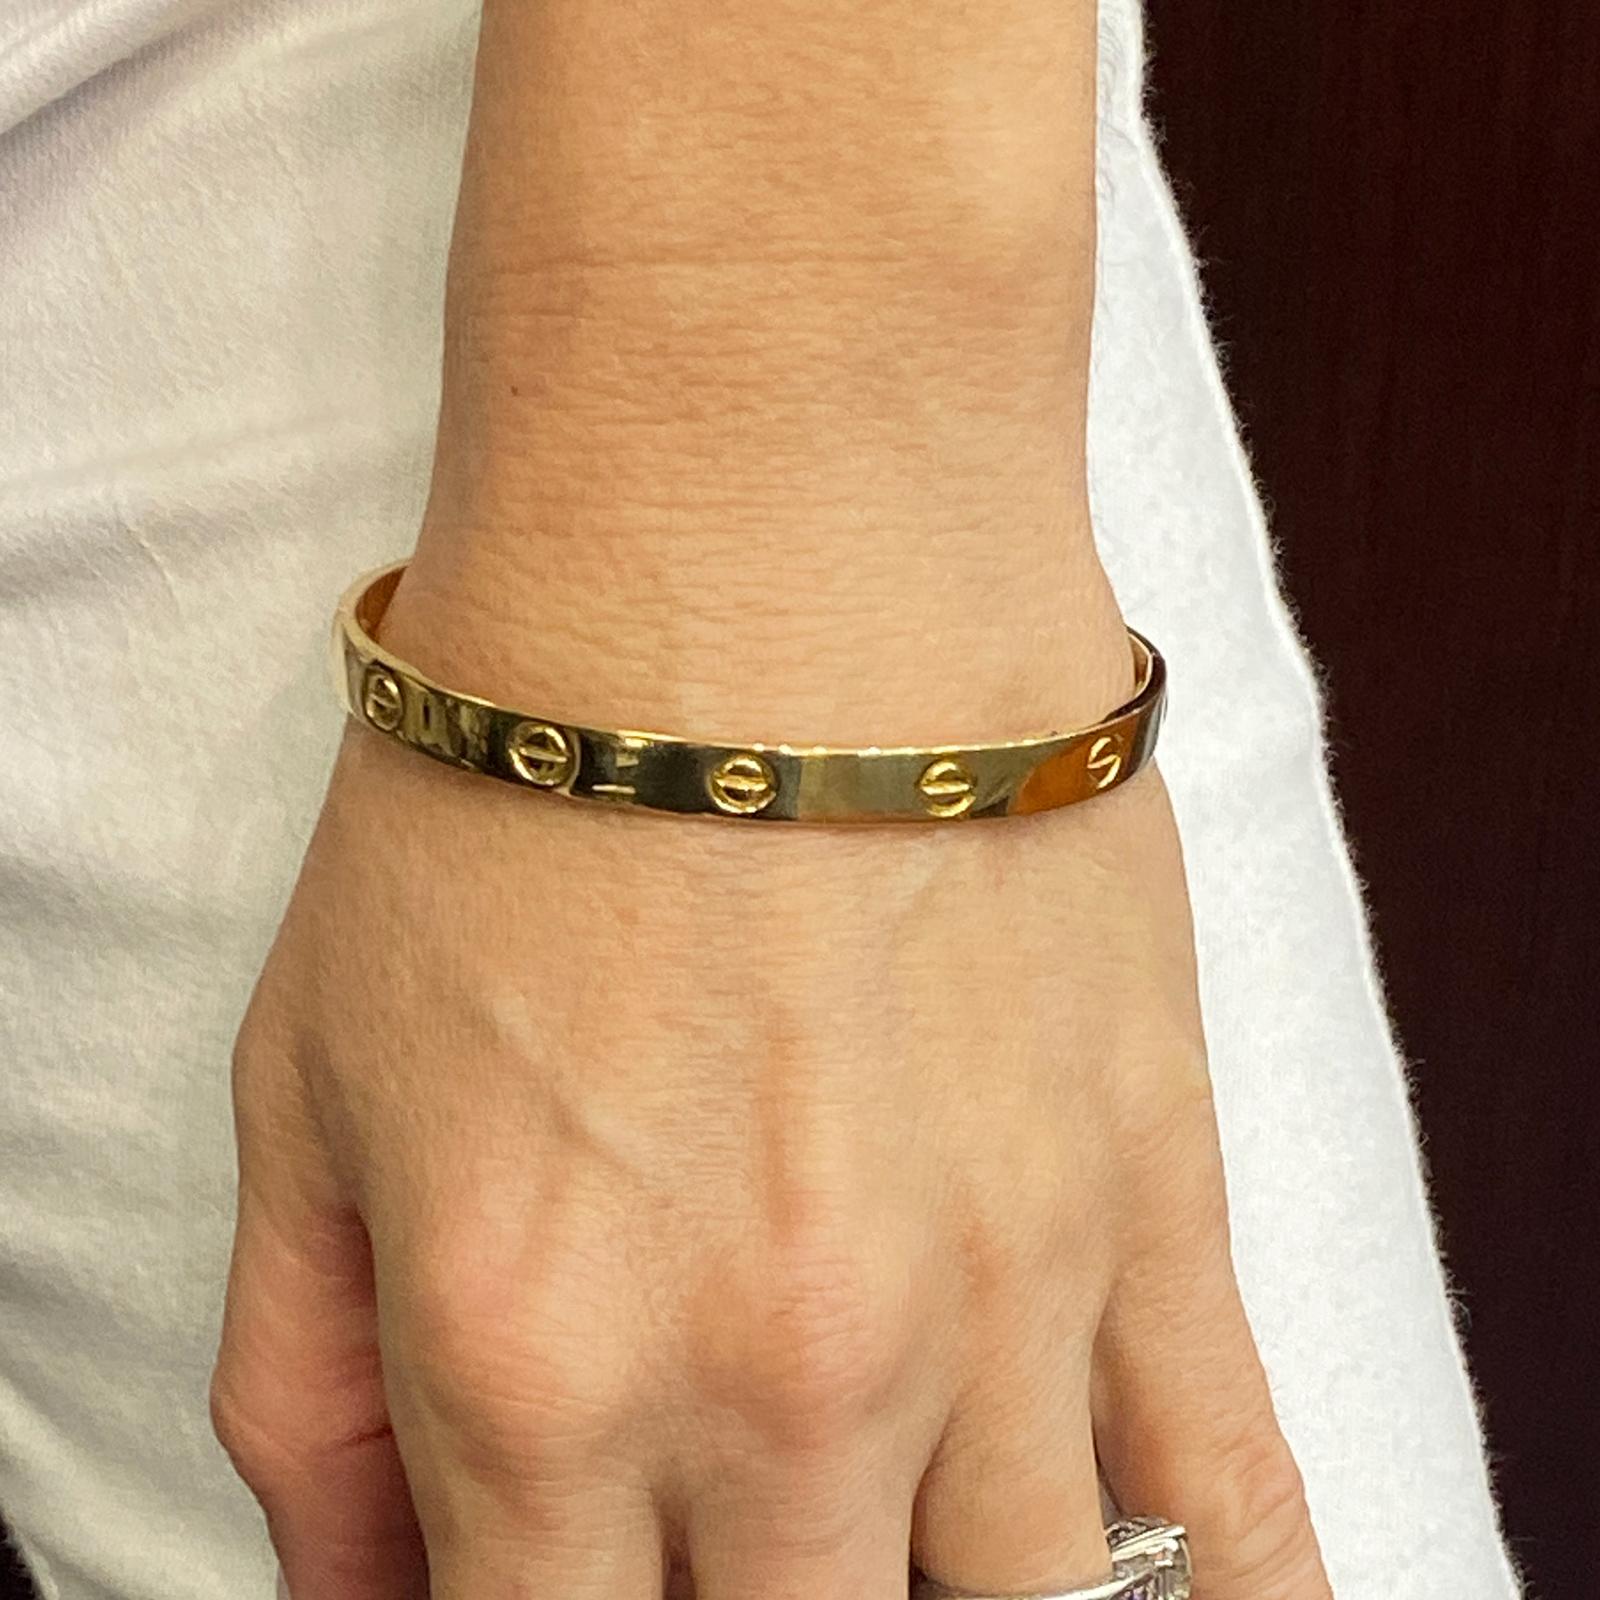 Original Authentic Cartier Love Bracelet by Aldo Cipullo circa 1970. The Love bracelet is crafted in solid 18 karat yellow gold, and measures 19cm in circumference (size 19). The bracelet comes in a Cartier pouch, but no screw driver. Signed Aldo